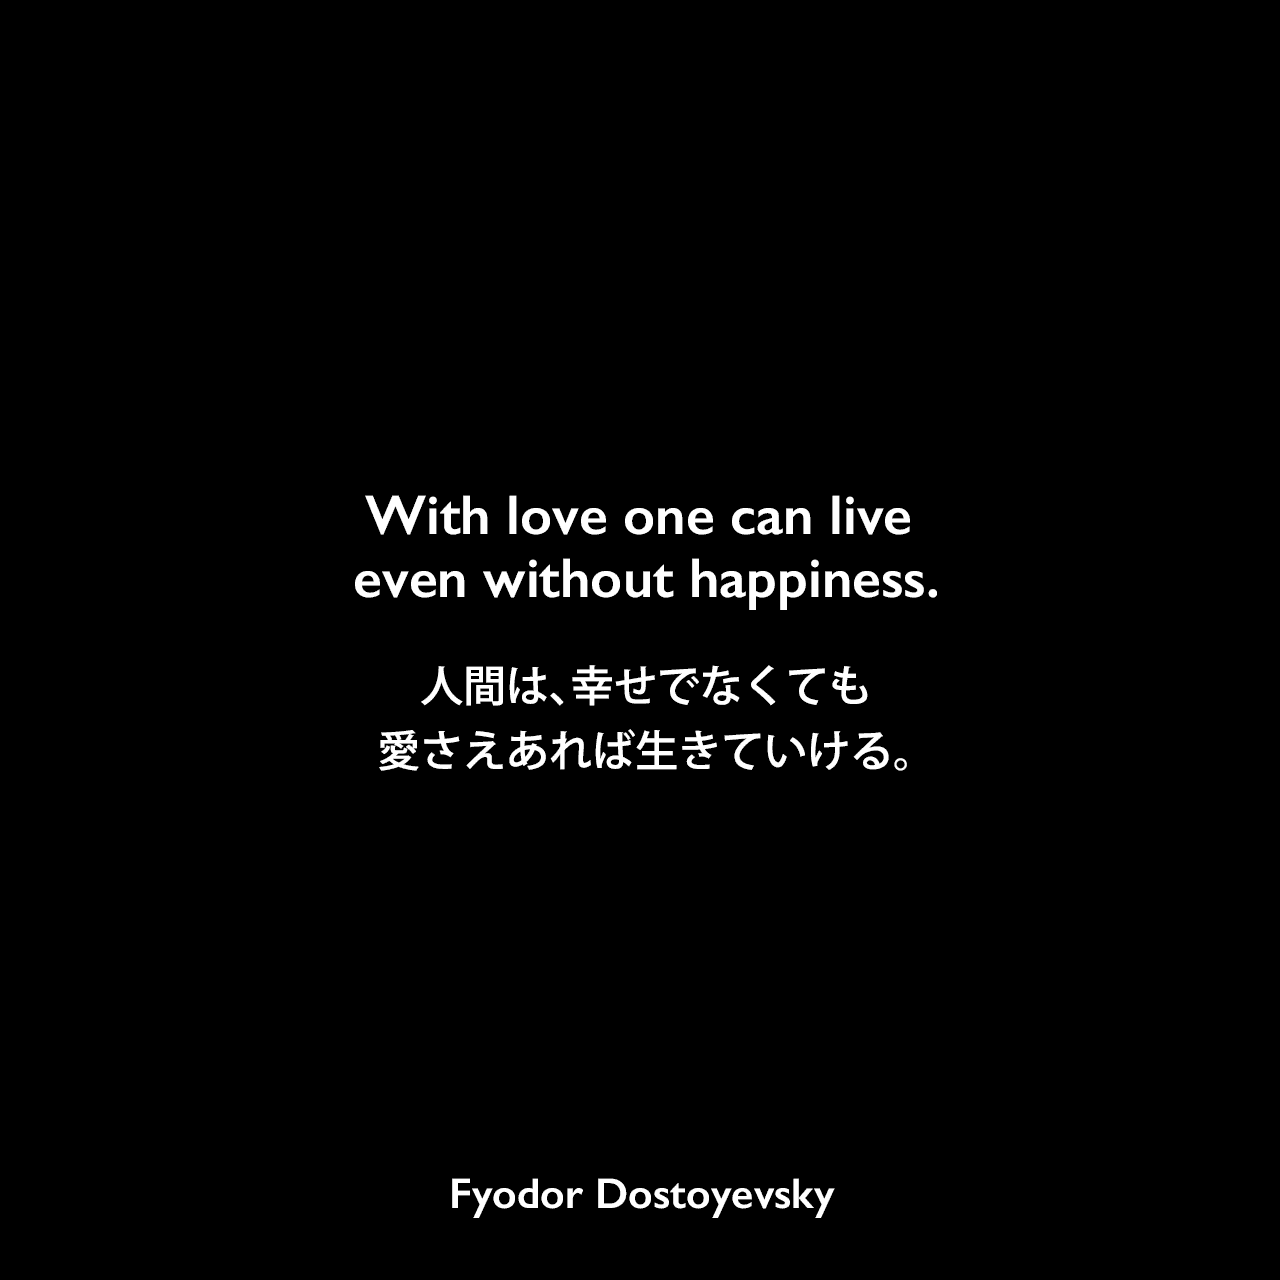 With love one can live even without happiness.人間は、幸せでなくても愛さえあれば生きていける。Fyodor Dostoyevsky